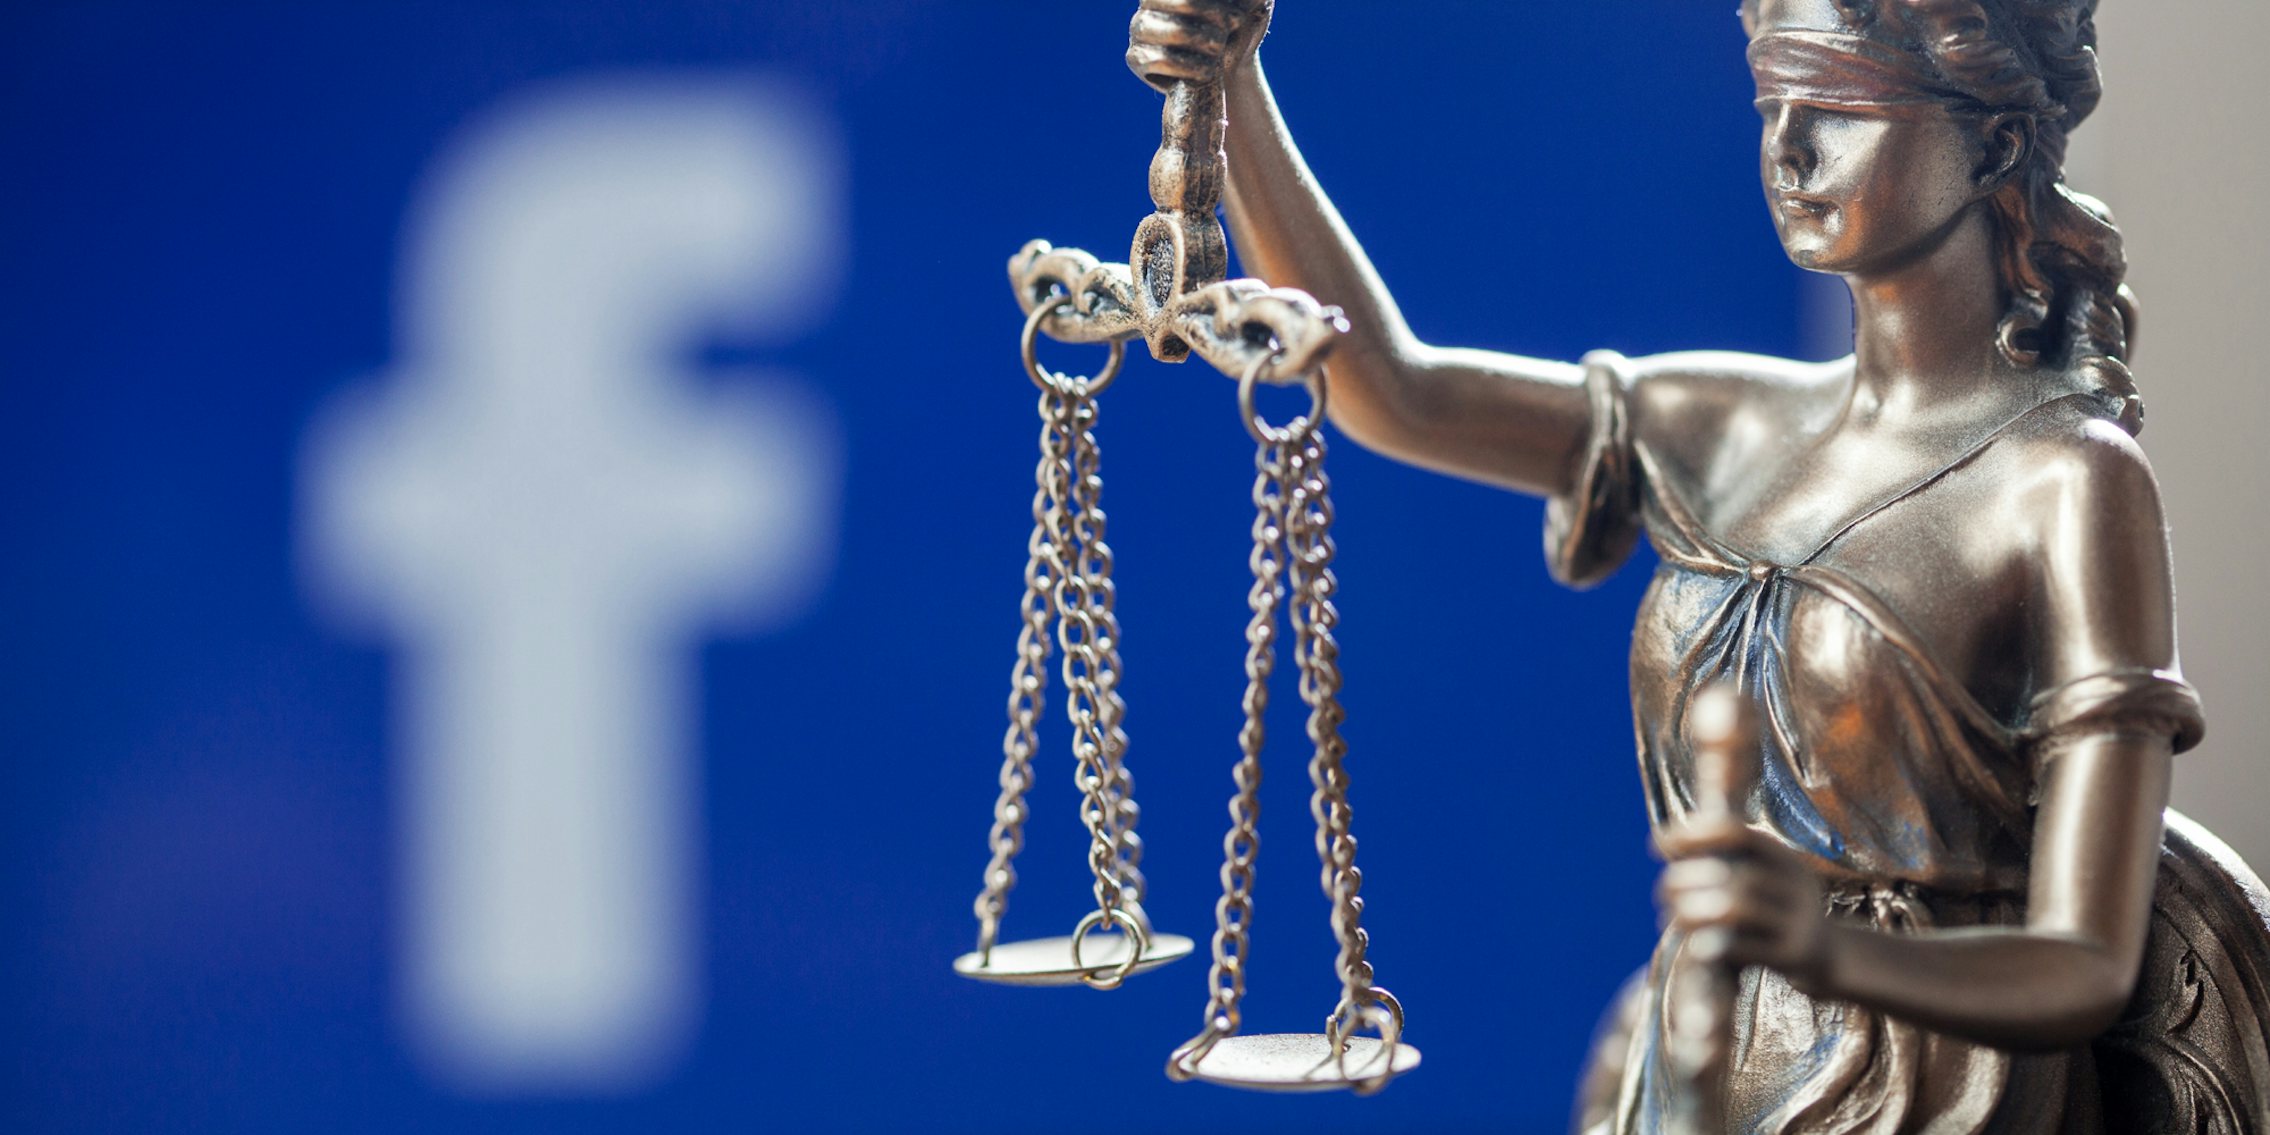 A statue of a woman holding a scale, representing the justice system. Behind the statue is a blurred out Facebook logo.